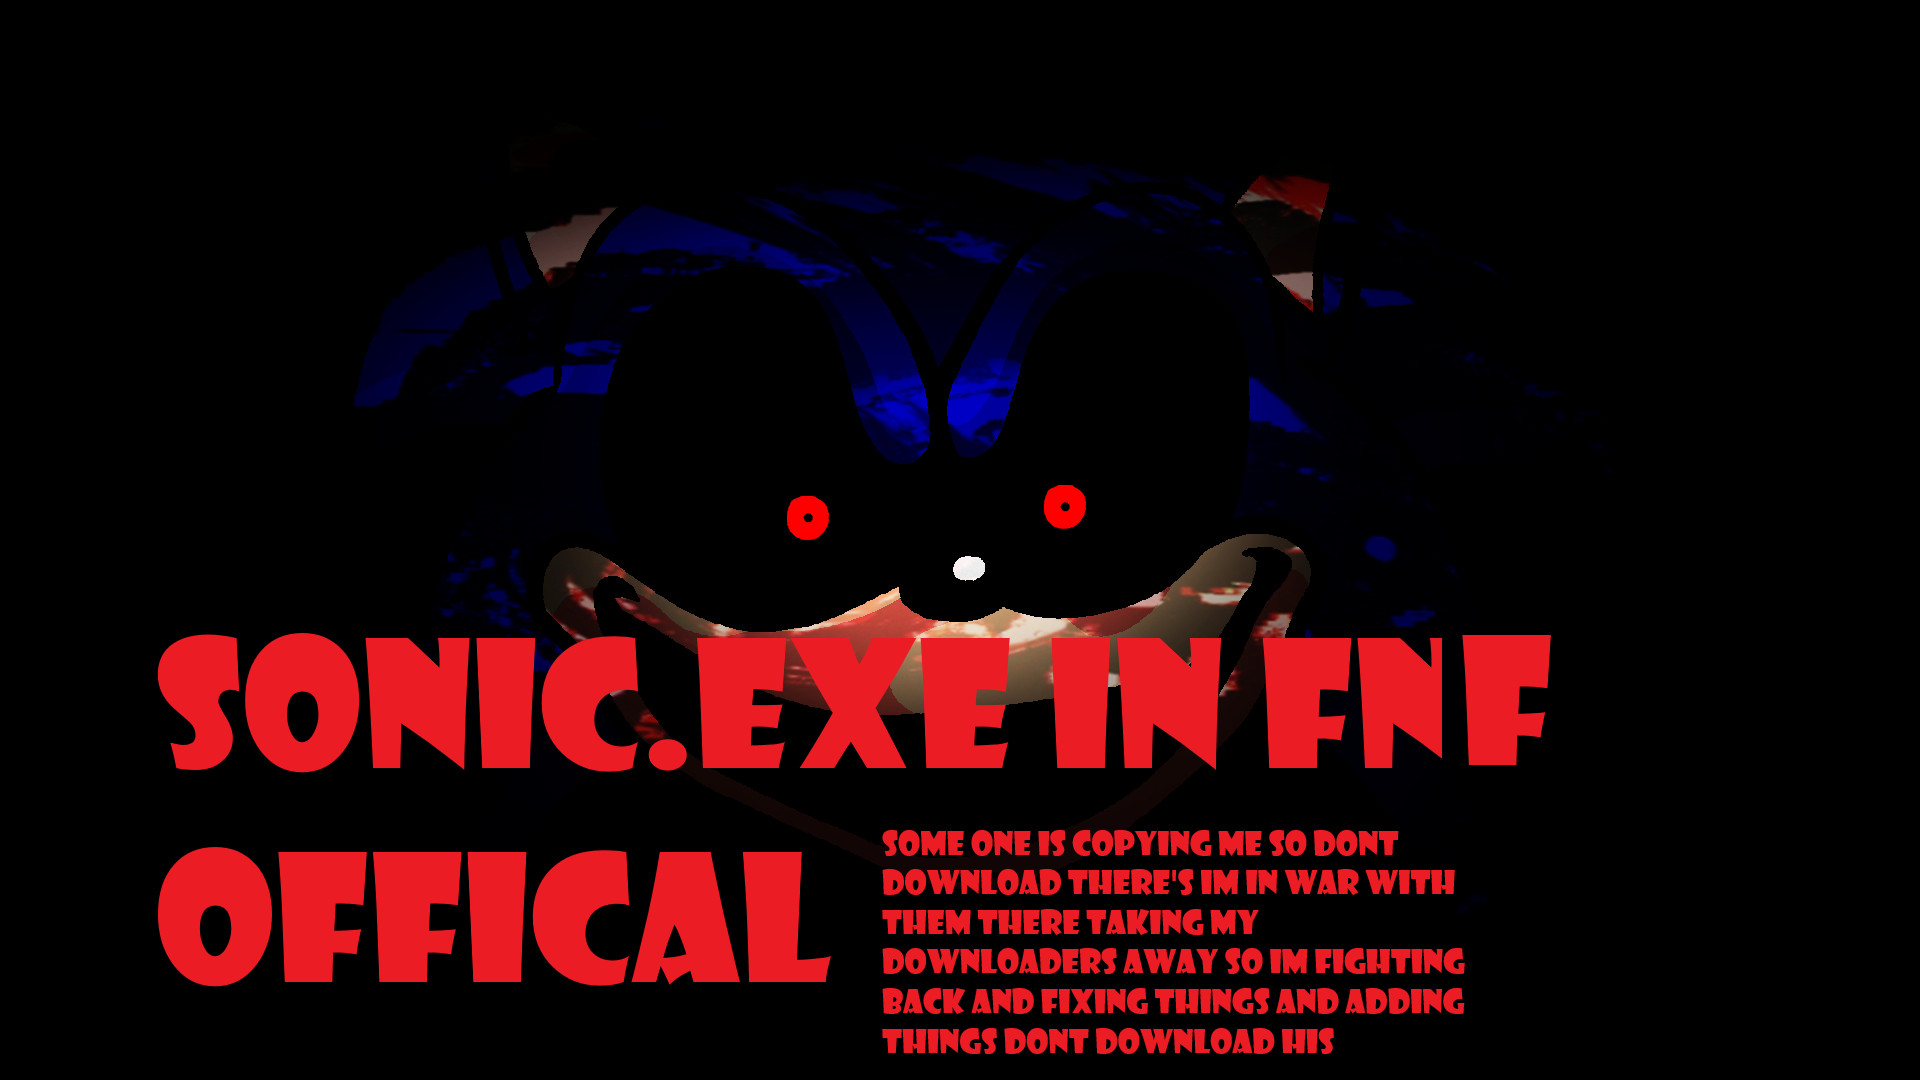 Friday Night Funkin' VS Sonic.EXE 3.0 Complete Build RESTORED